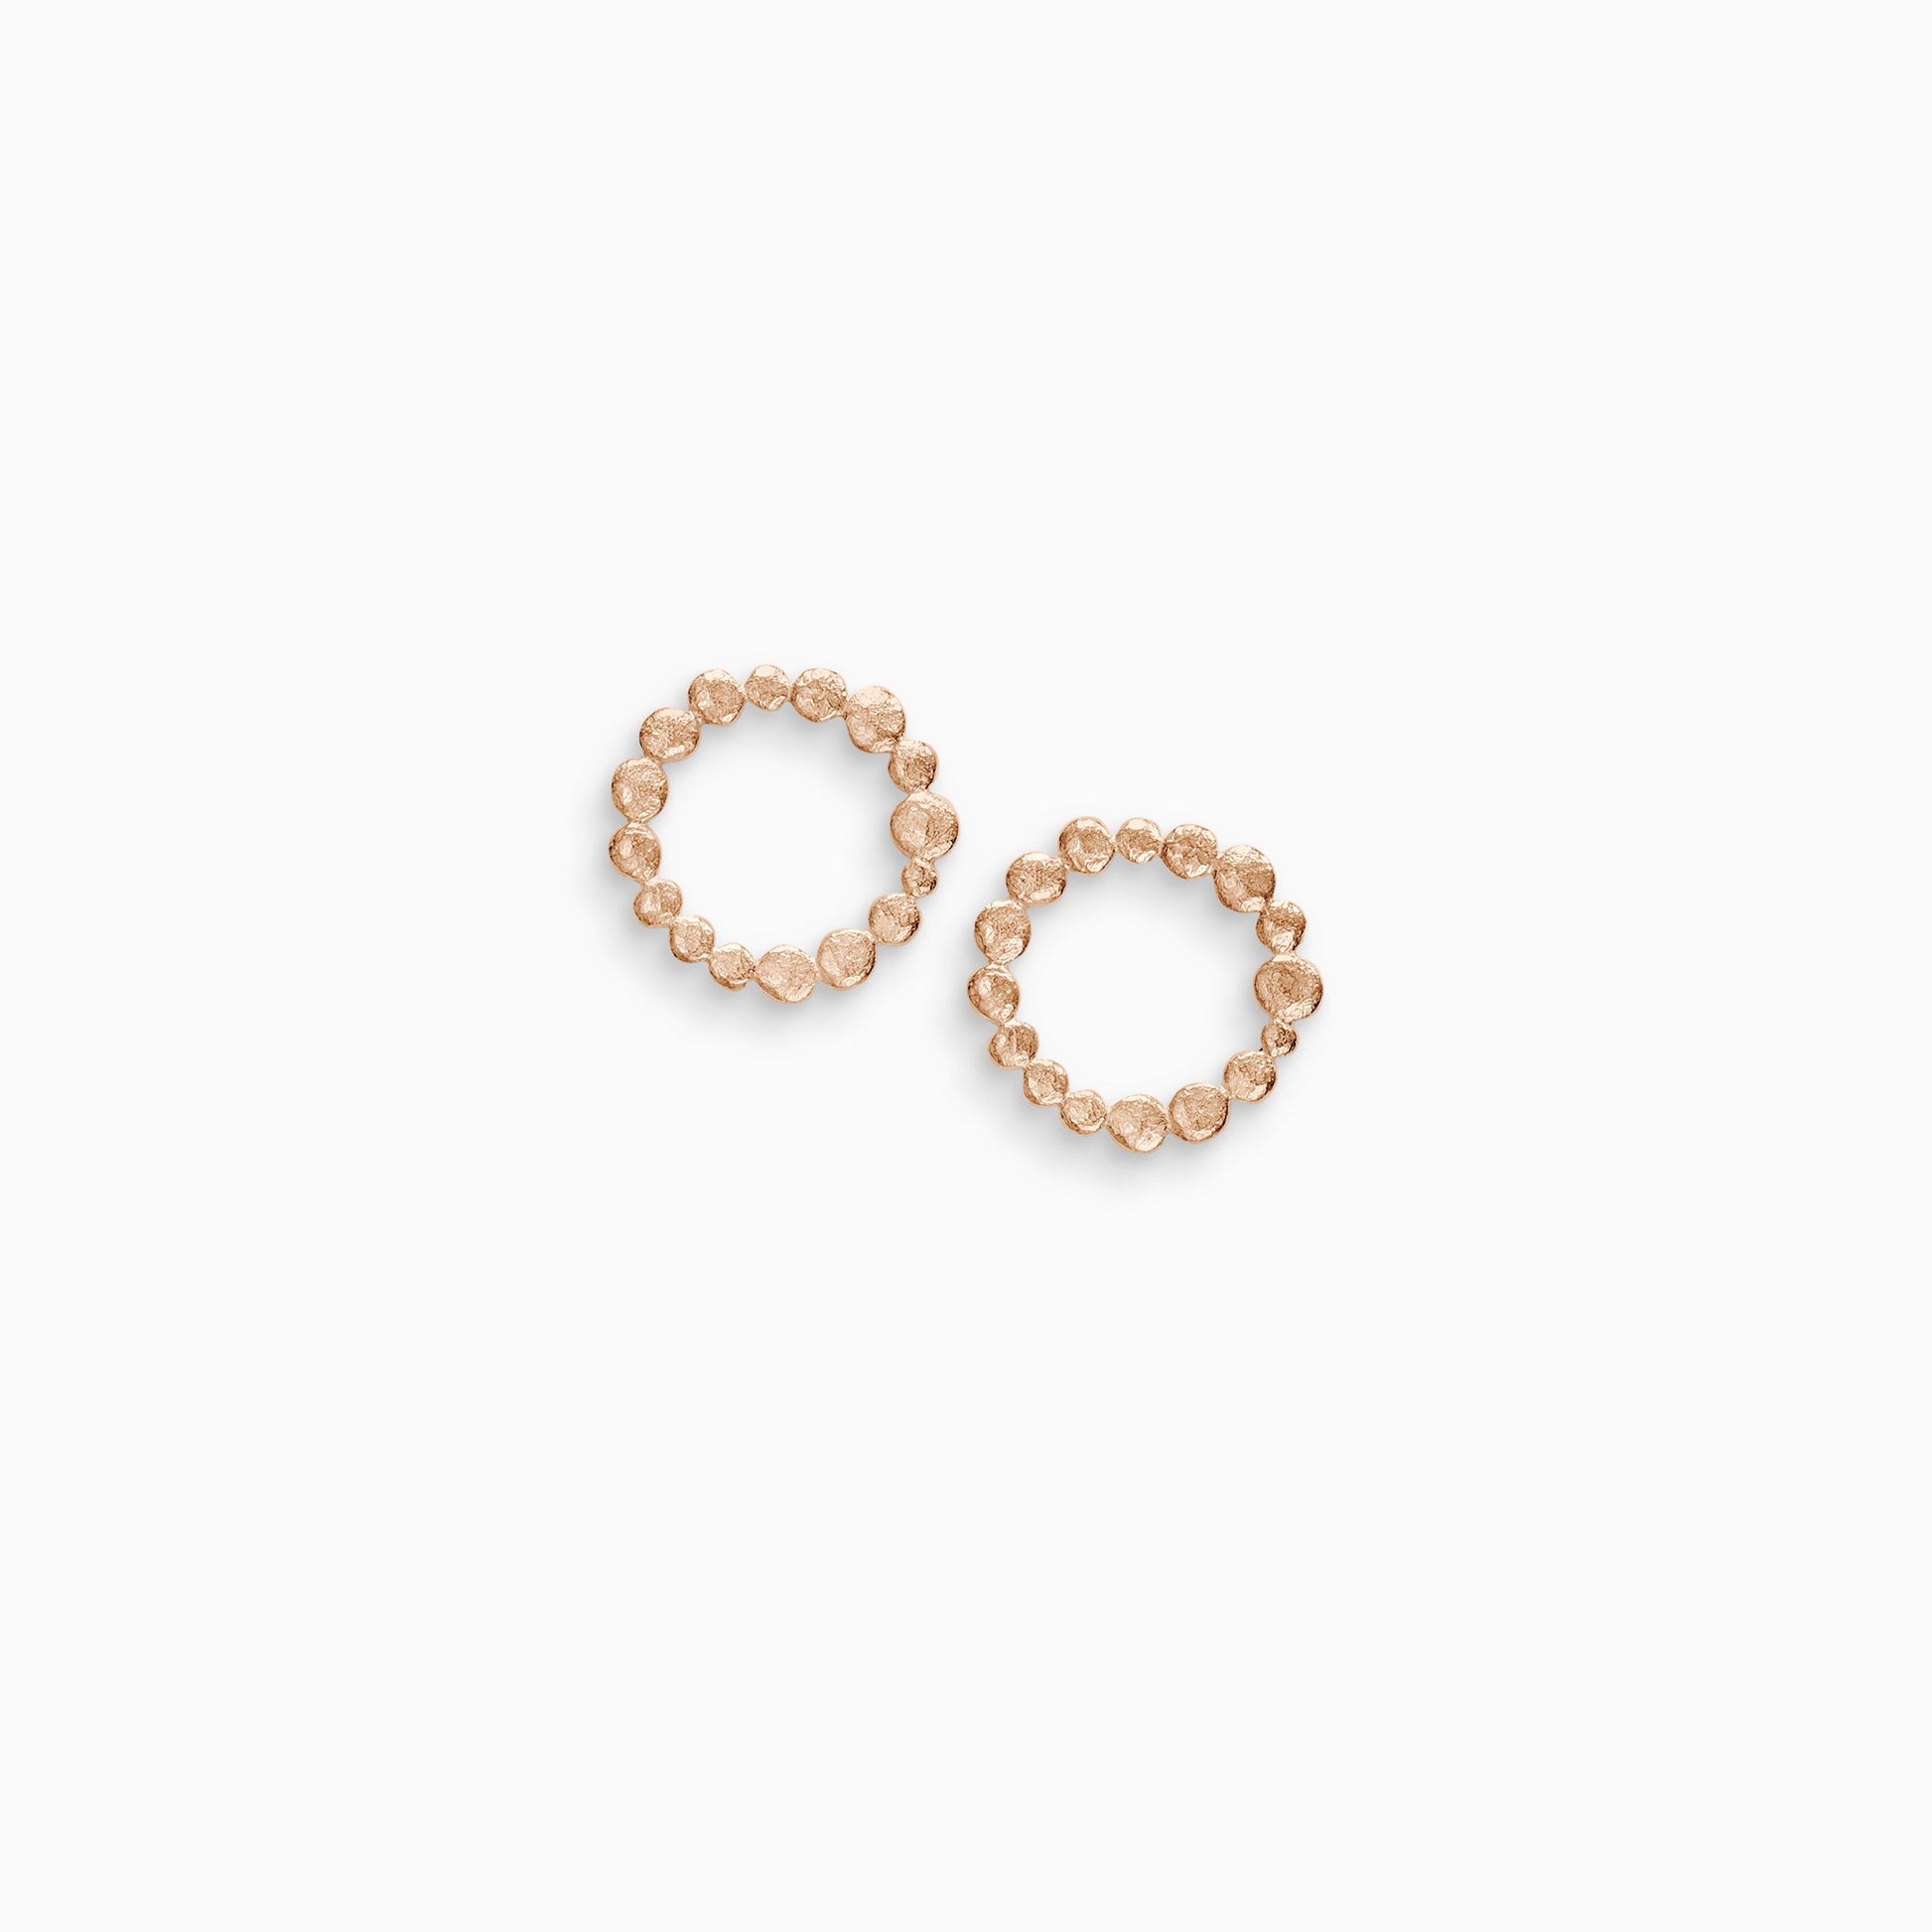 A pair of 18ct Fairtrade rose gold small earrings made of tiny undulating textured and connected dots forming a closed circle. 25mm outside diameter 